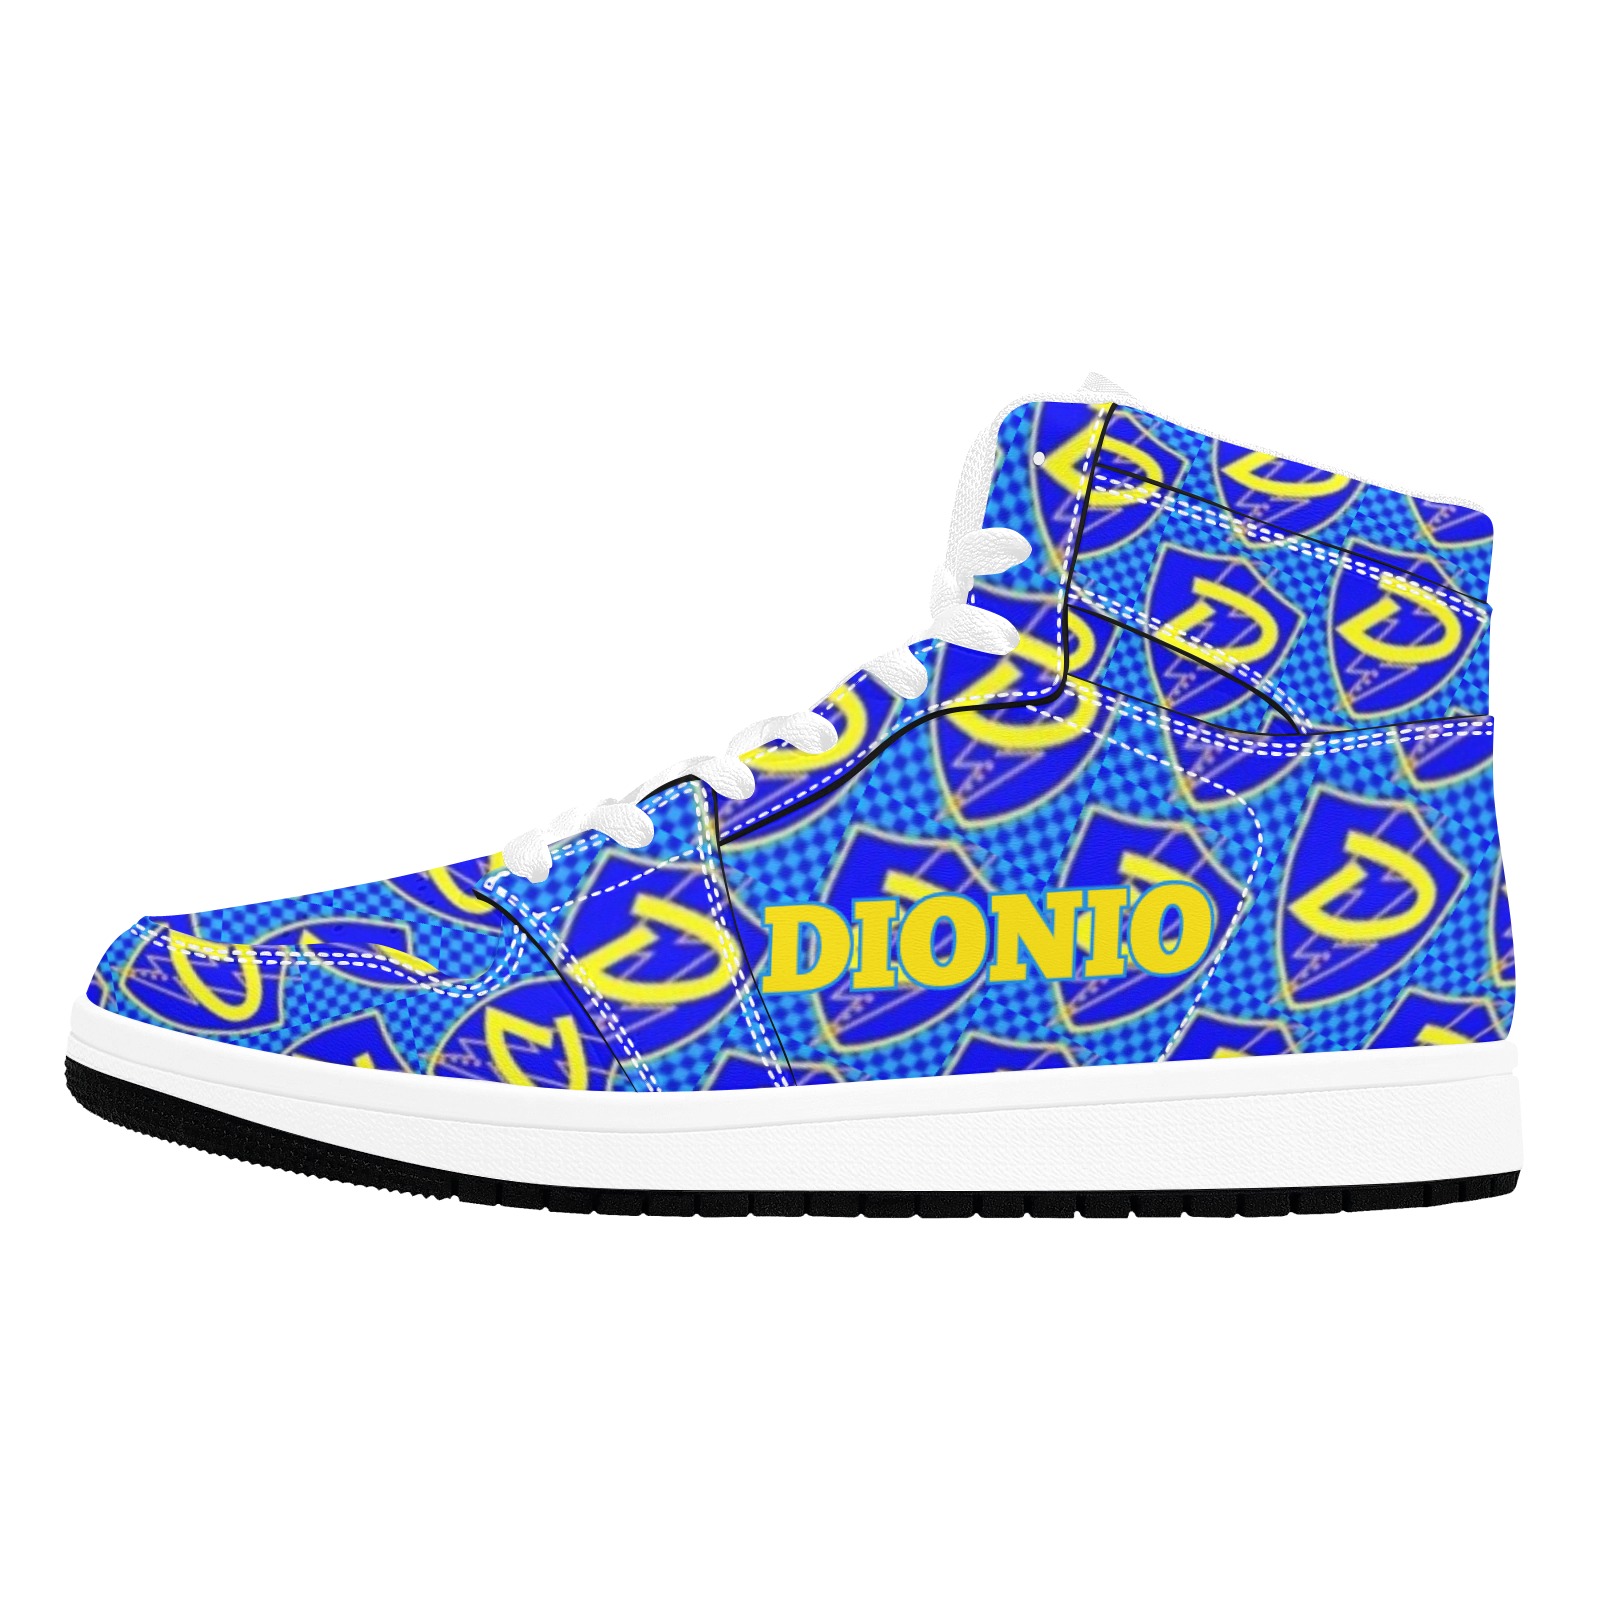 DIONIO - Blue & Yellow Repeat D Shield Logo Leather Sneakers Unisex High Top Sneakers (Model 20042)